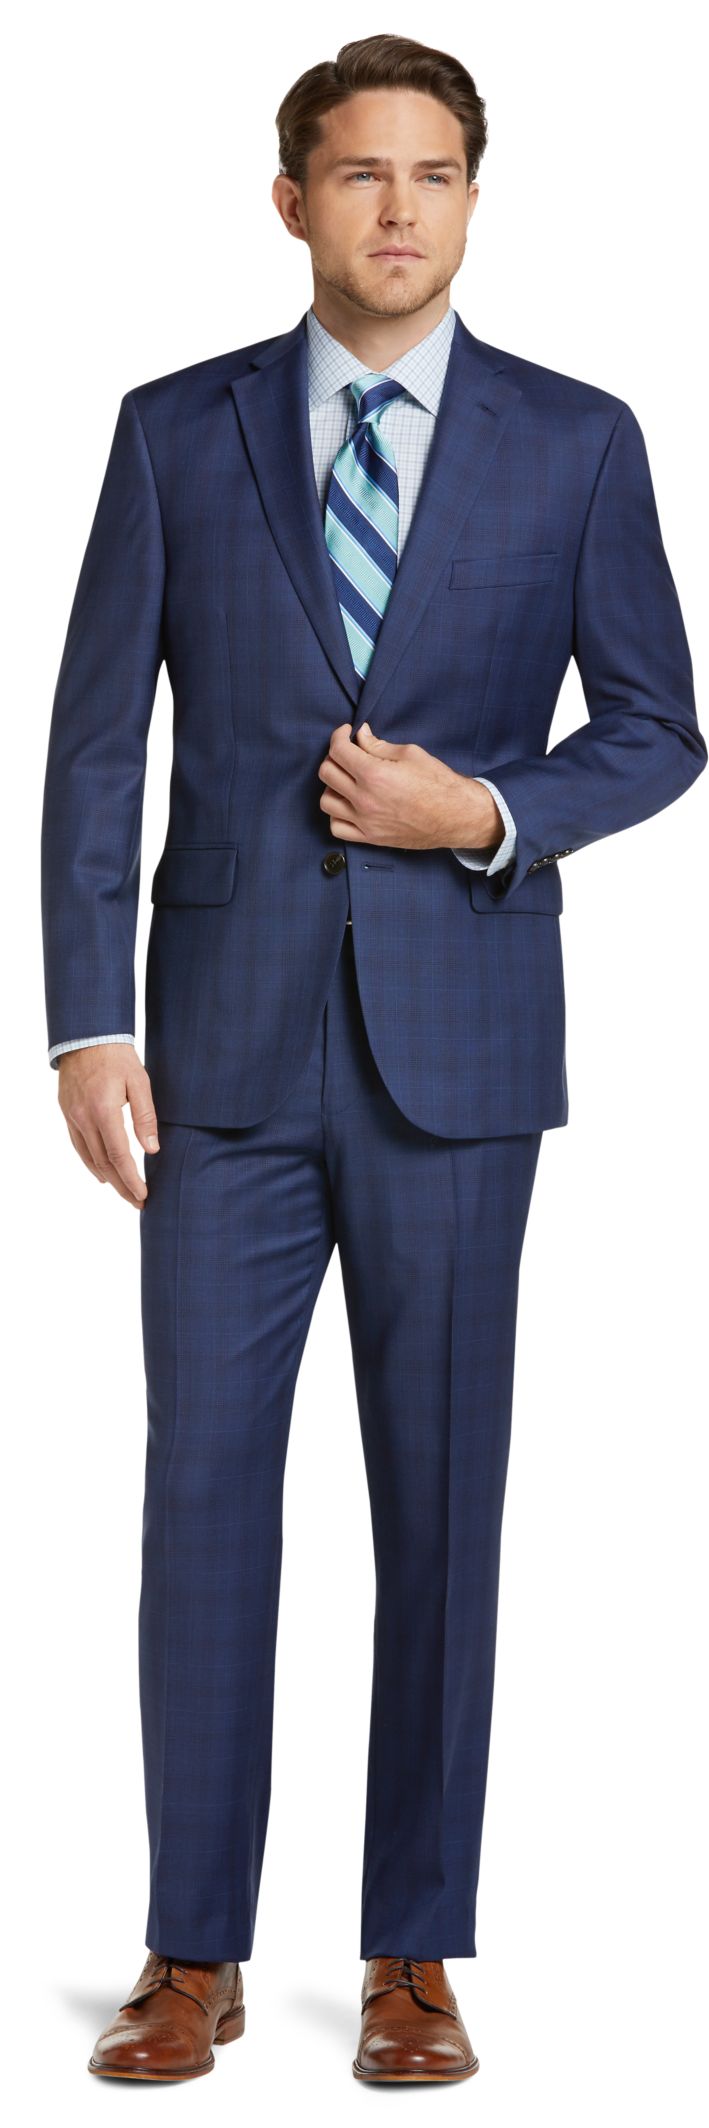 Traveler Collection Tailored Fit Plaid Suit CLEARANCE - All Clearance ...